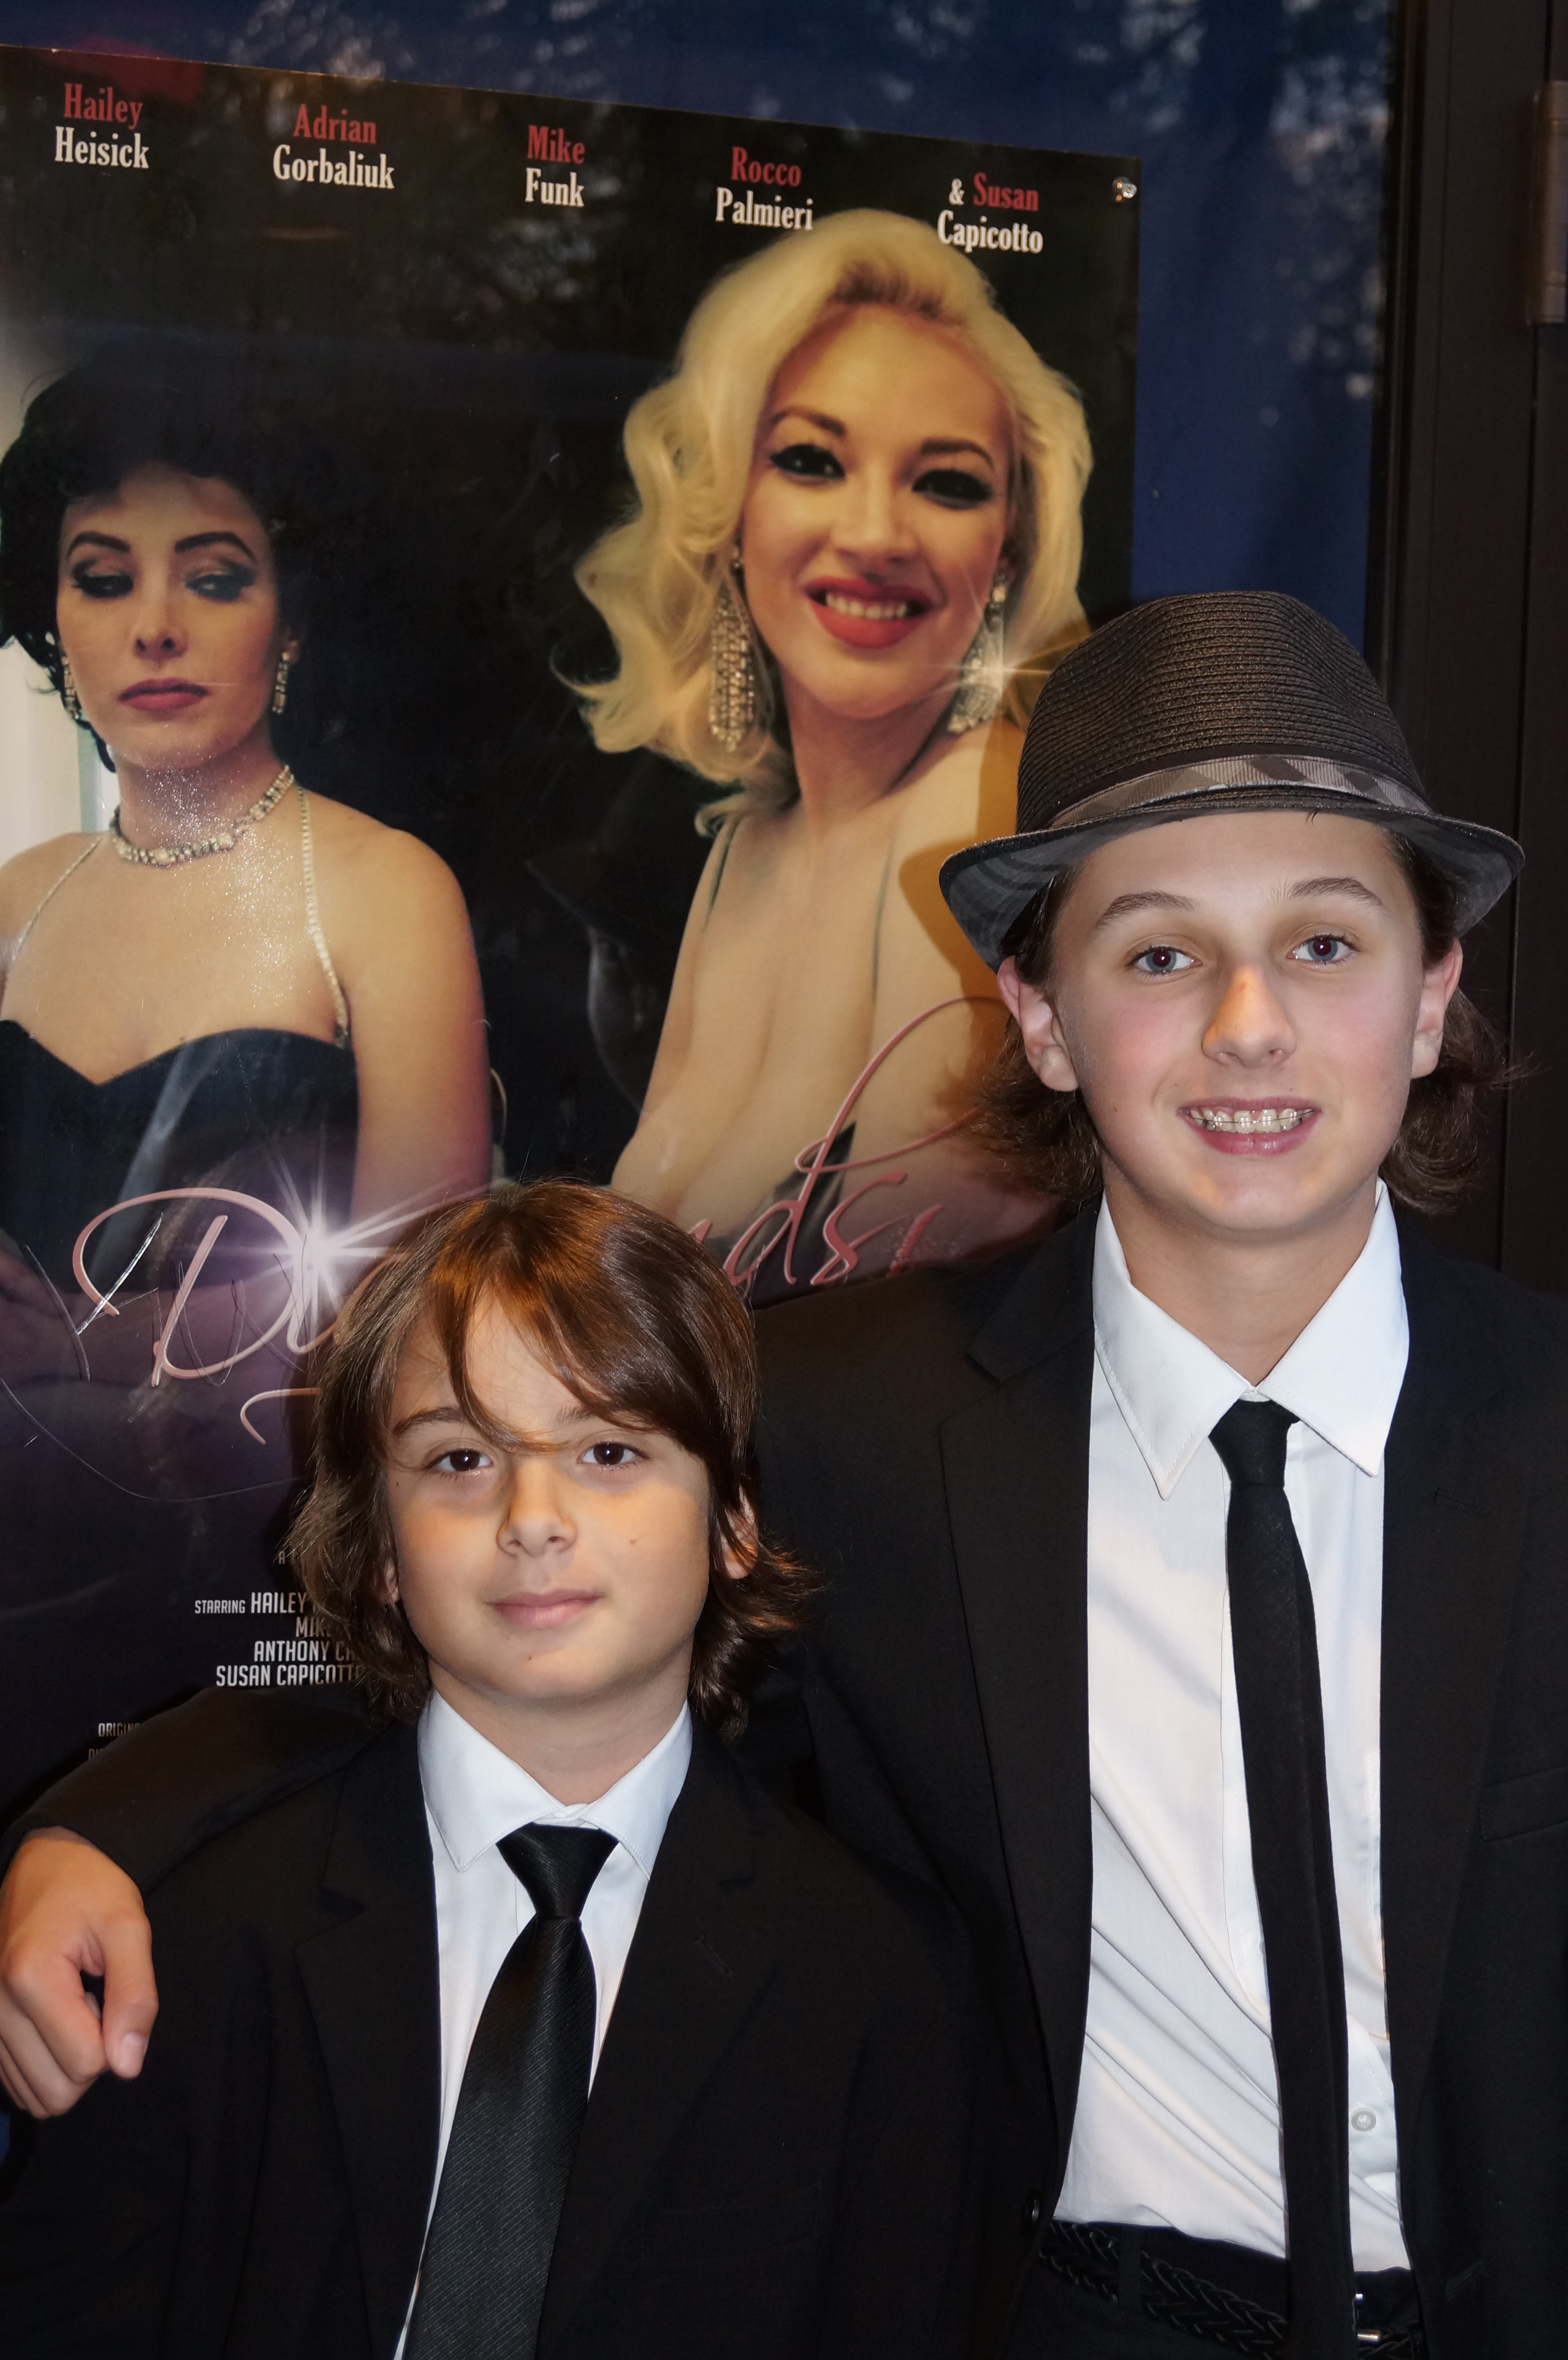 Brady Bryson with co-star Joshua Scordia who plays his younger brother Zoltan Hargitay